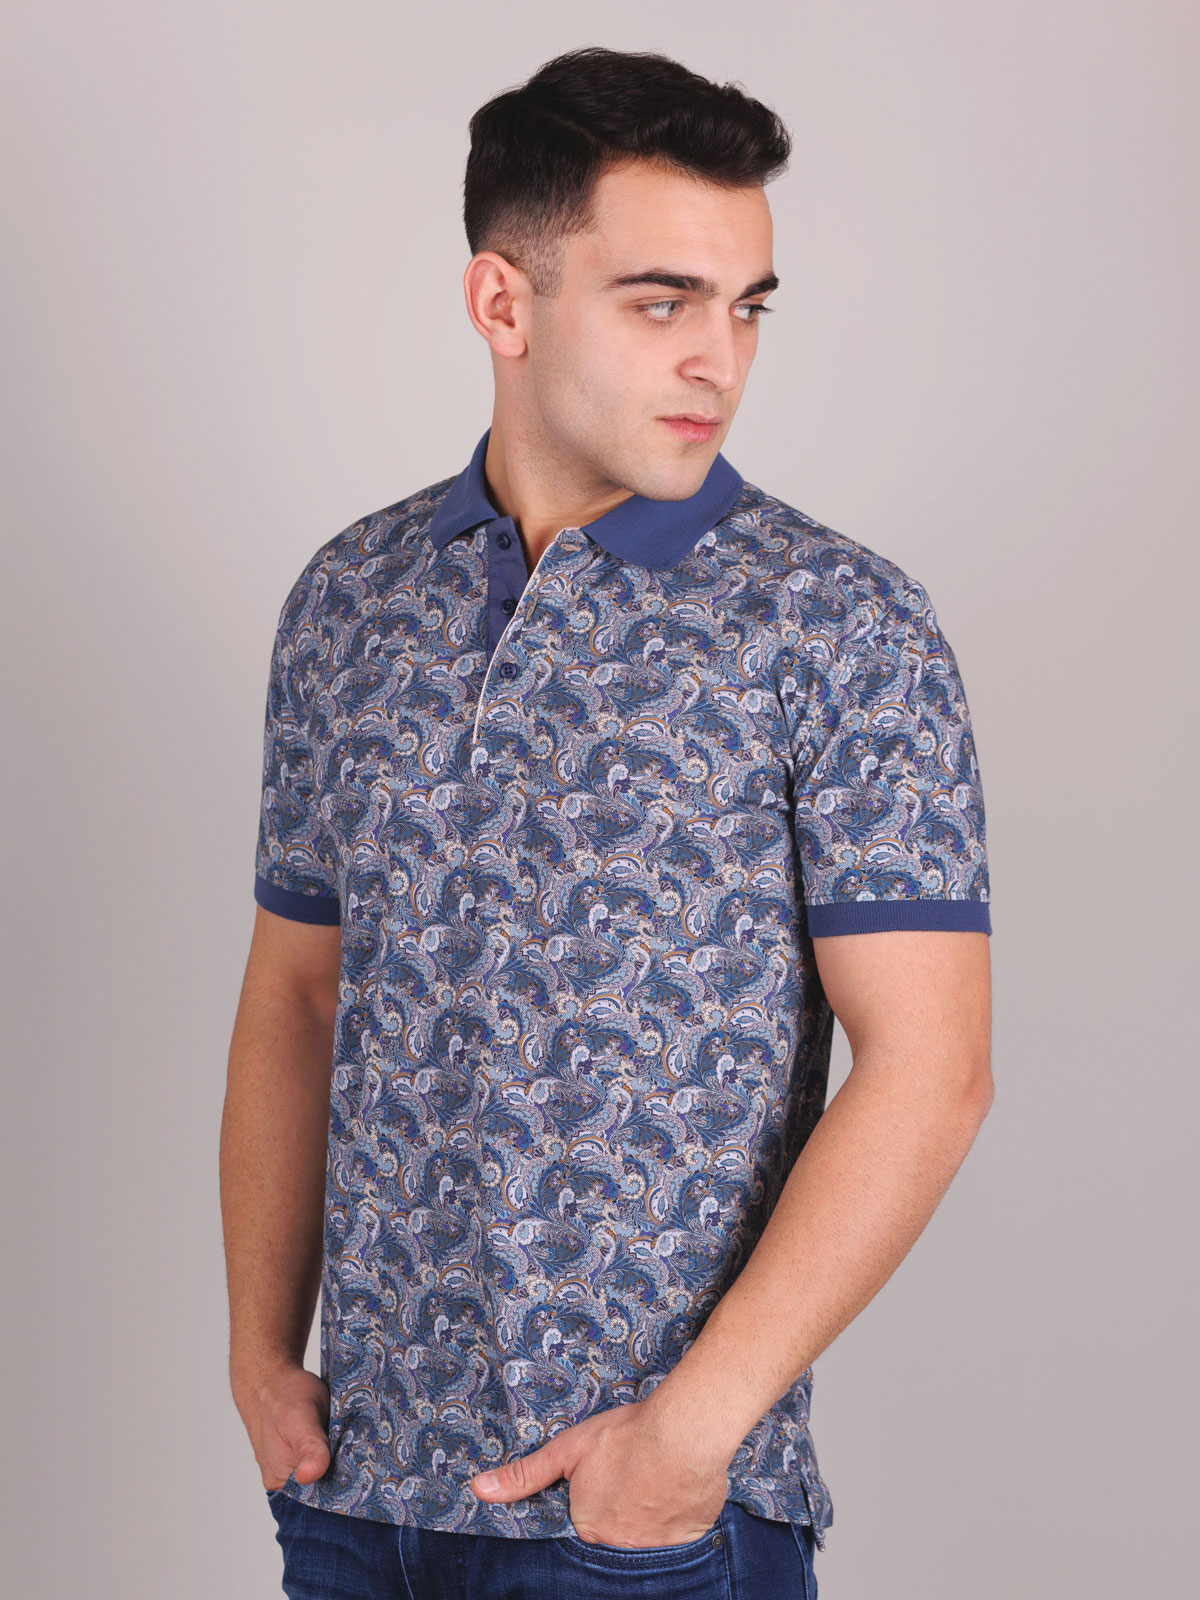 Tshirt in blue with paisley print - 93426 € 40.49 img4